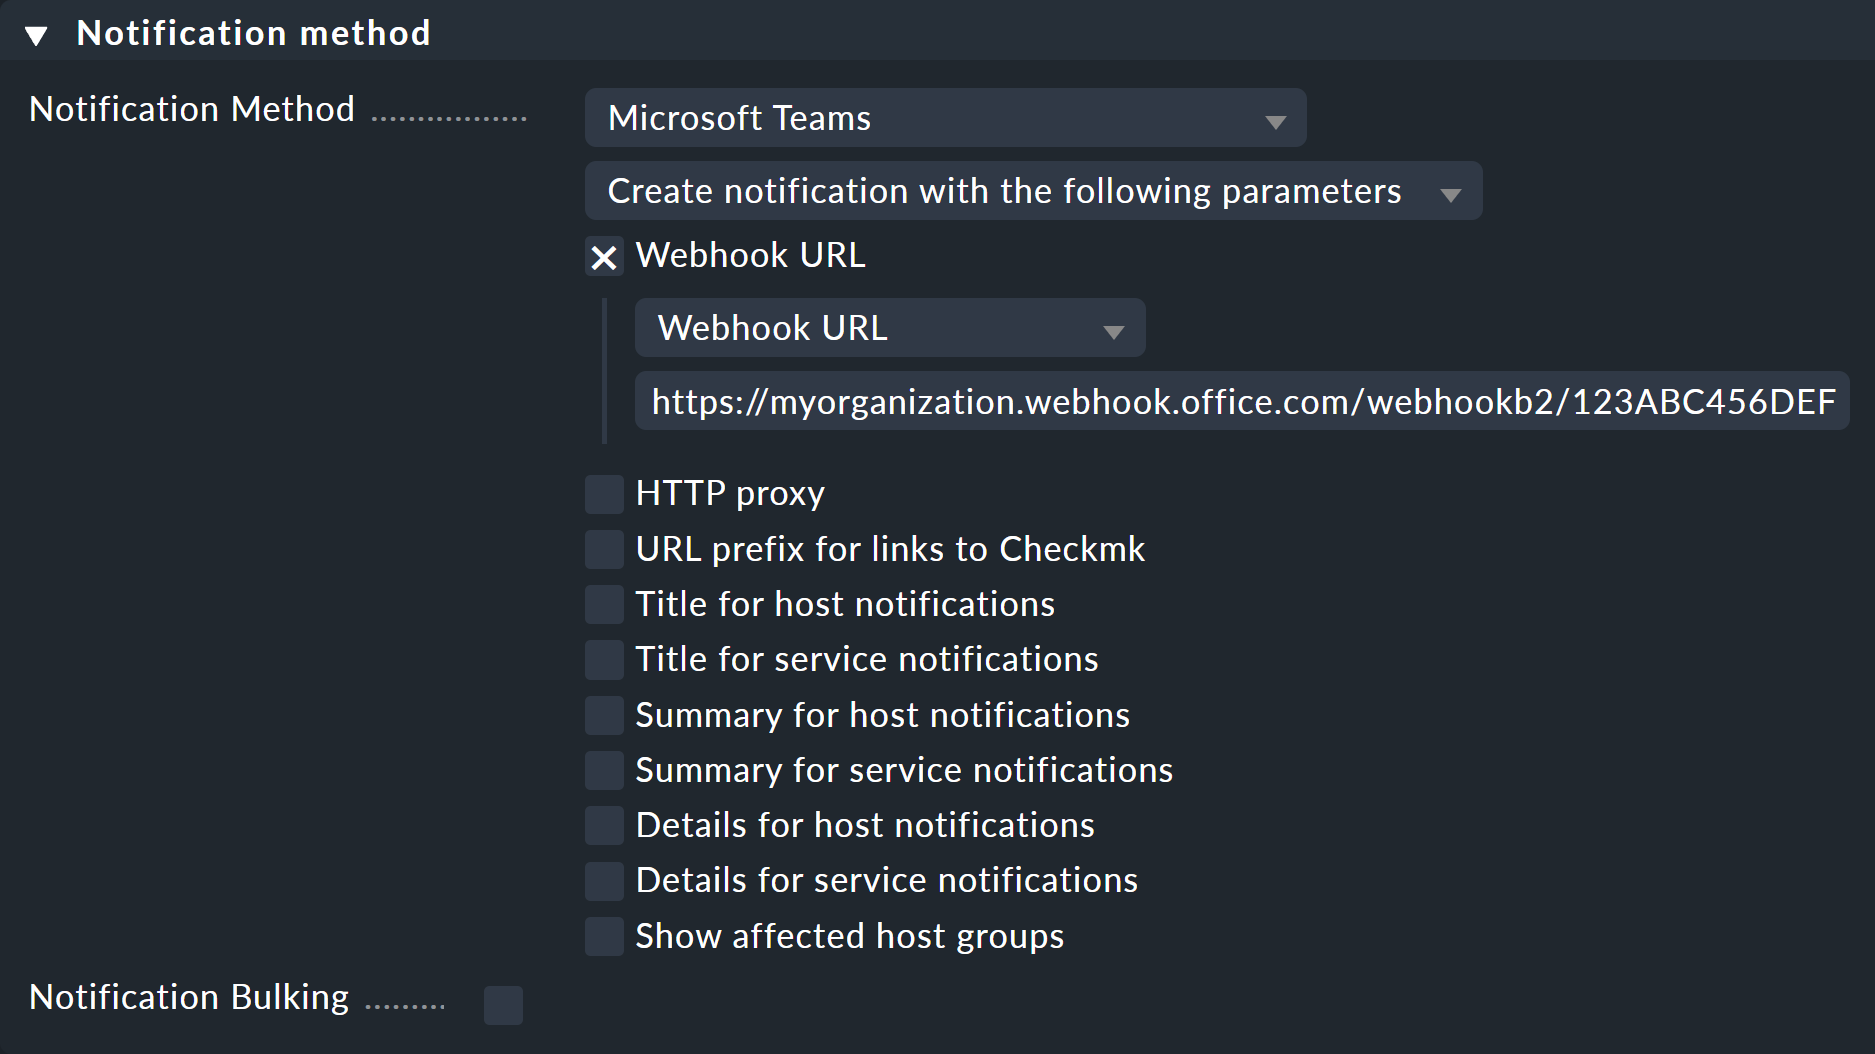 The notification method settings for Microsoft Teams.